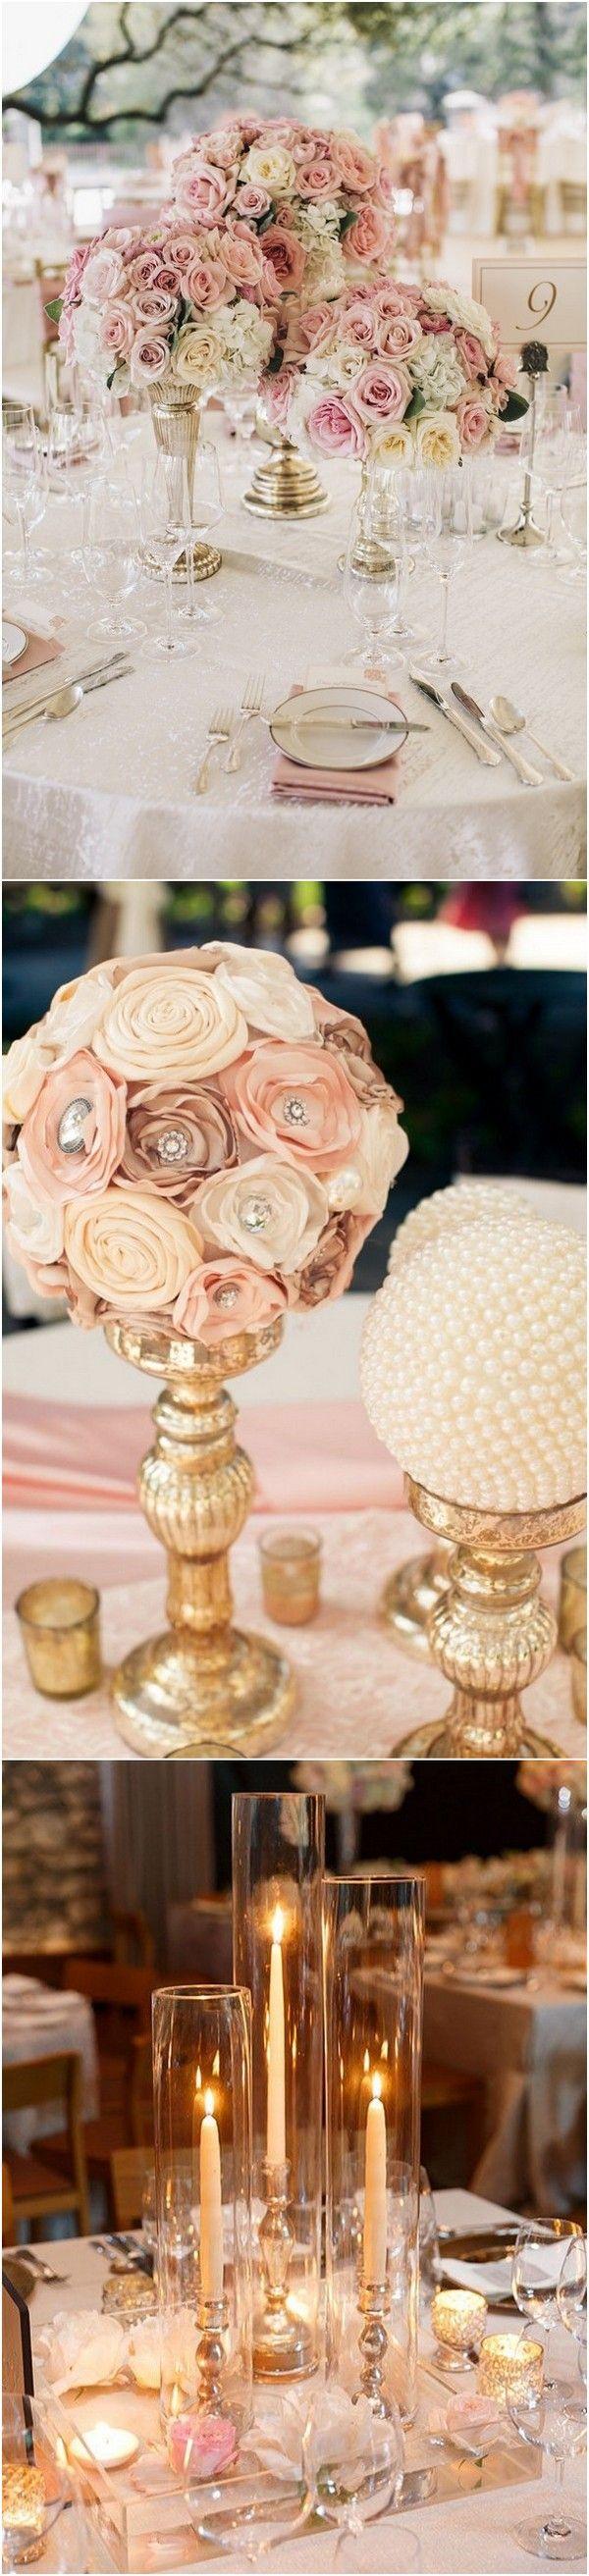 Mariage - Trending-18 Outstanding Wedding Centerpieces With Candlesticks - Page 3 Of 3